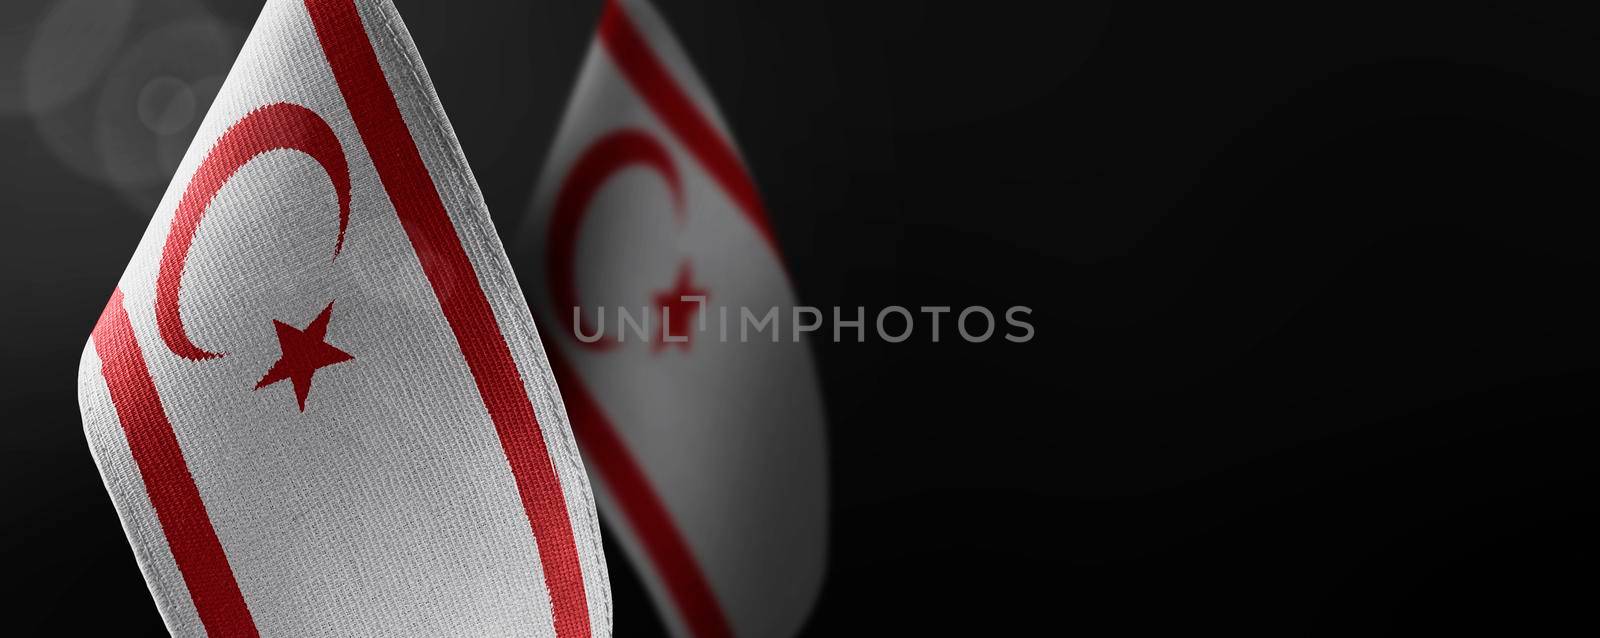 Small national flags of the Northern Cyprus on a dark background.